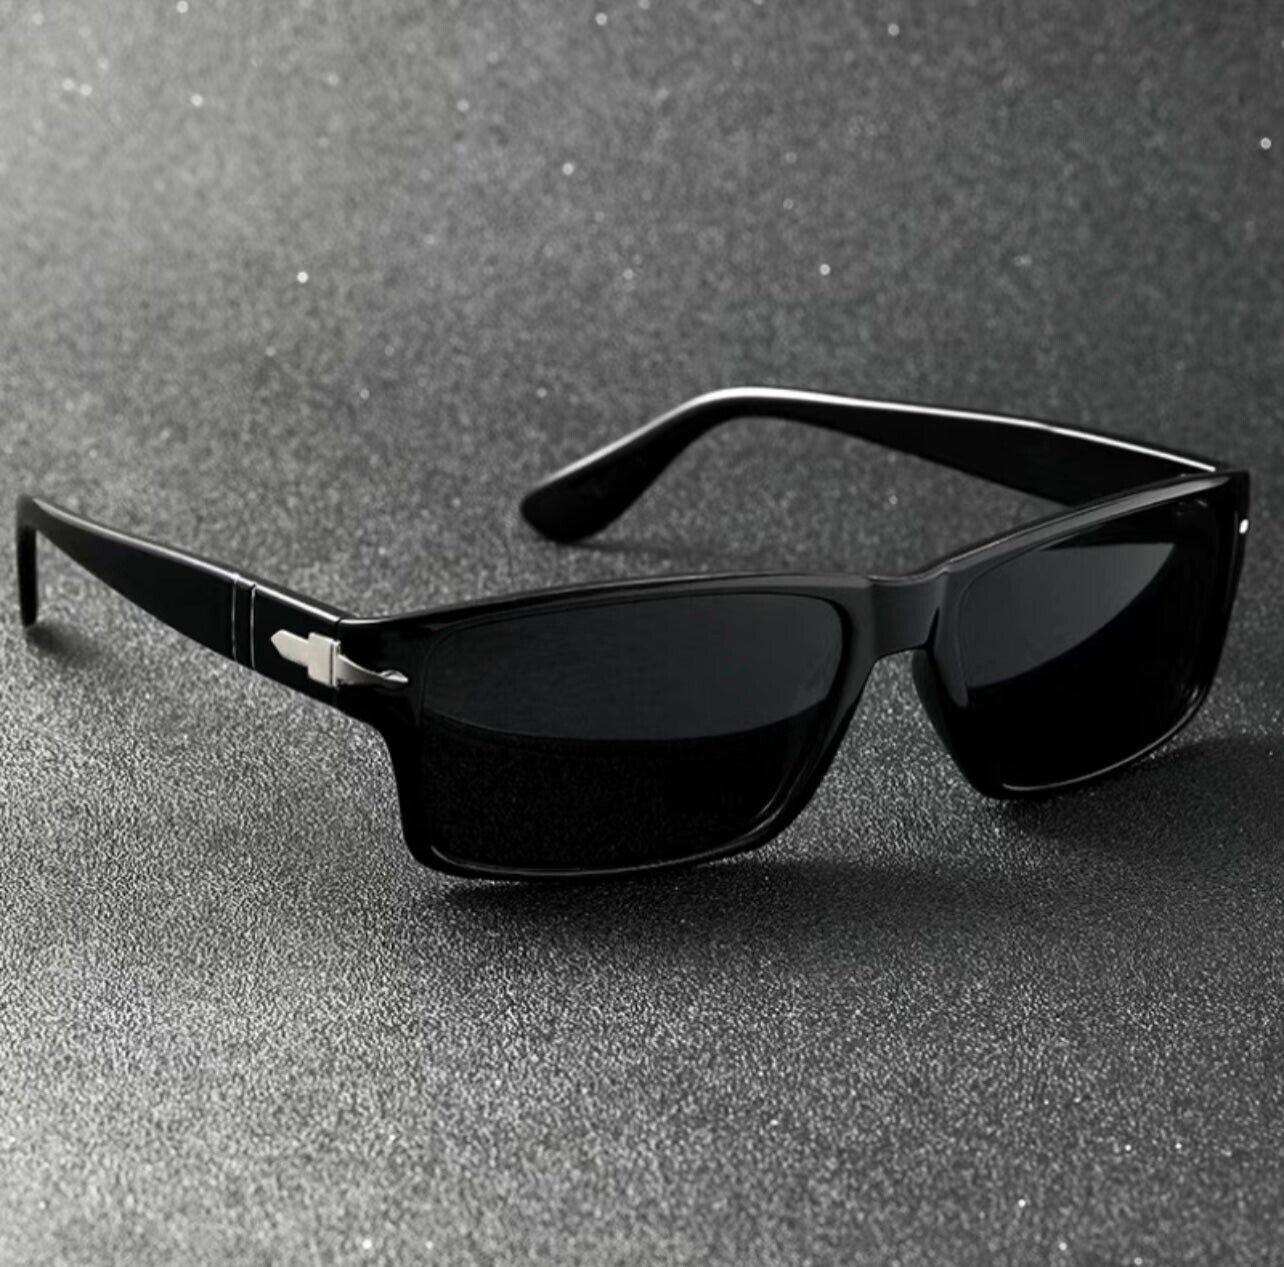 Primary image for Men's Polarized Sunglasses: Vintage Classic Eyewear for Driving, Holidays,